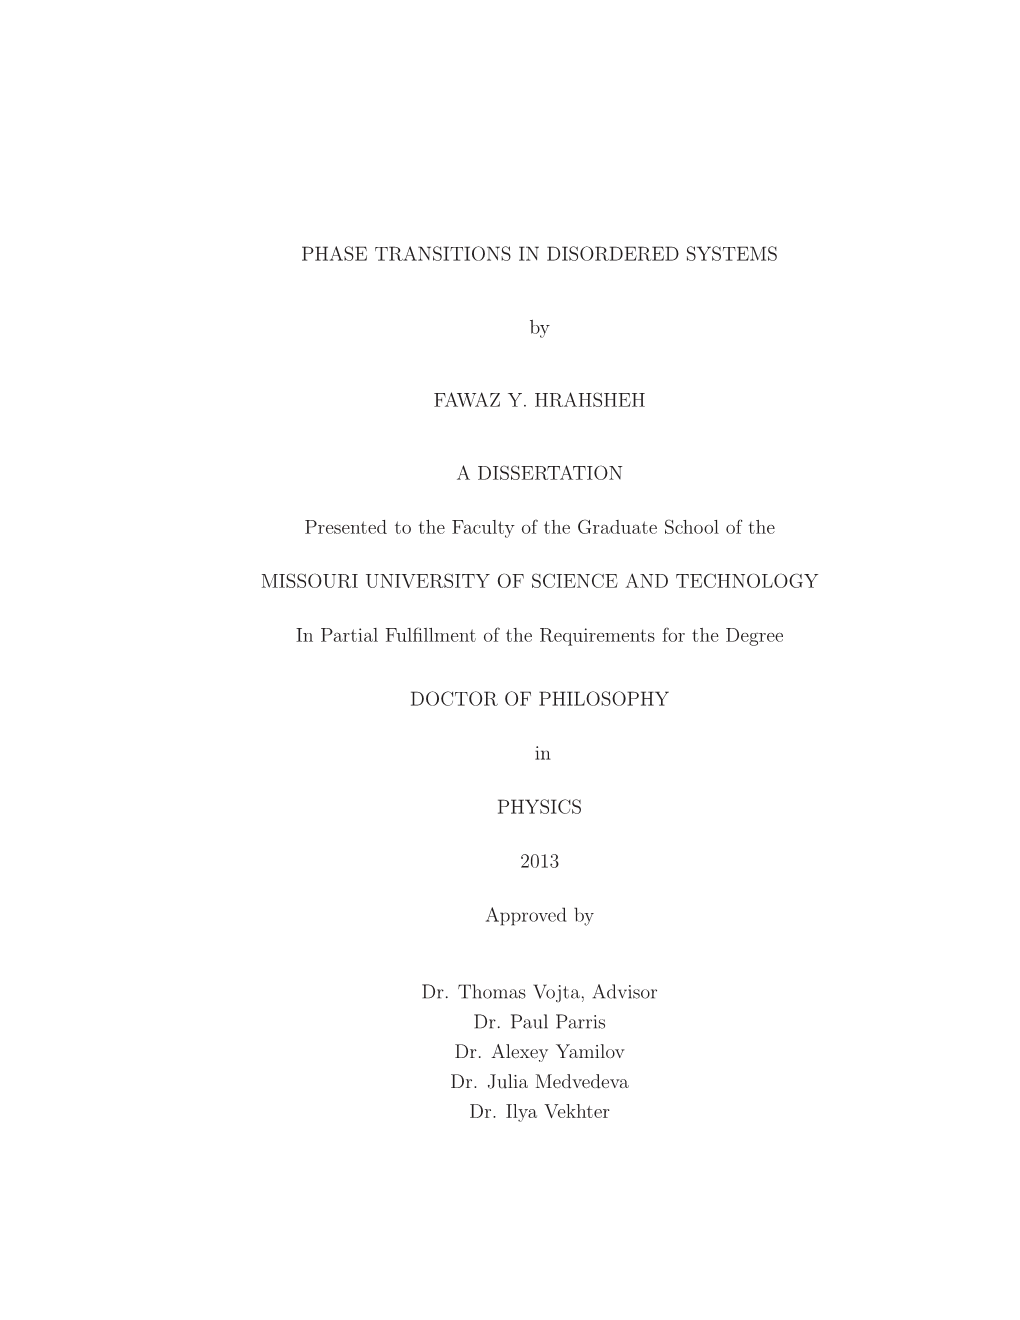 Thesis We Study the Eﬀects of Disorder on Several Classical and Quantum Phase Transitions in Condensed Matter Systems